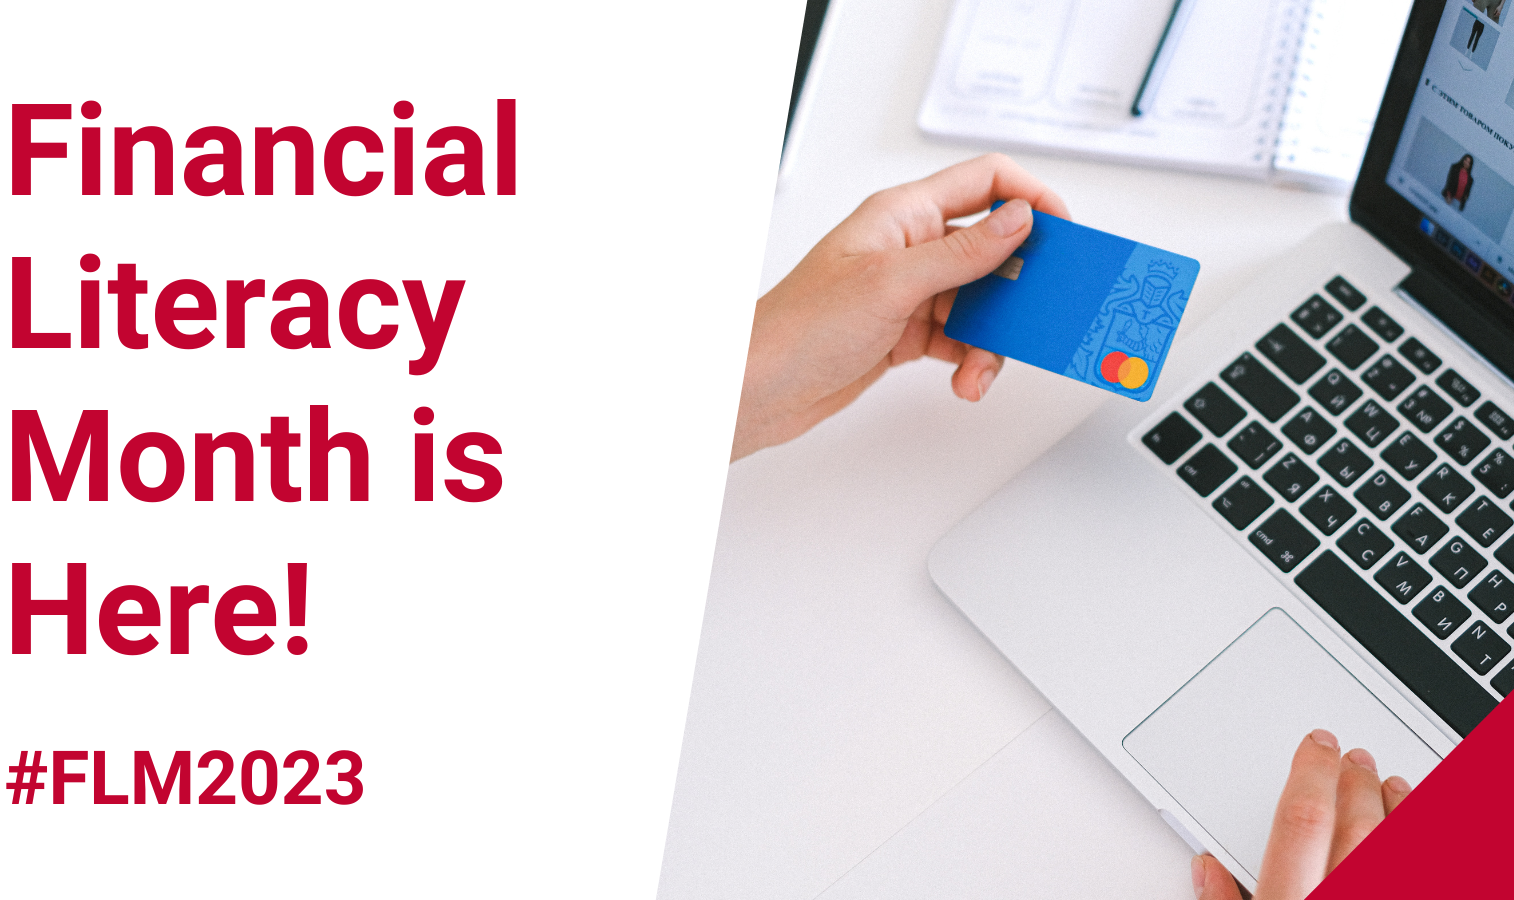 Financial Literacy Month is here! #FLM2023